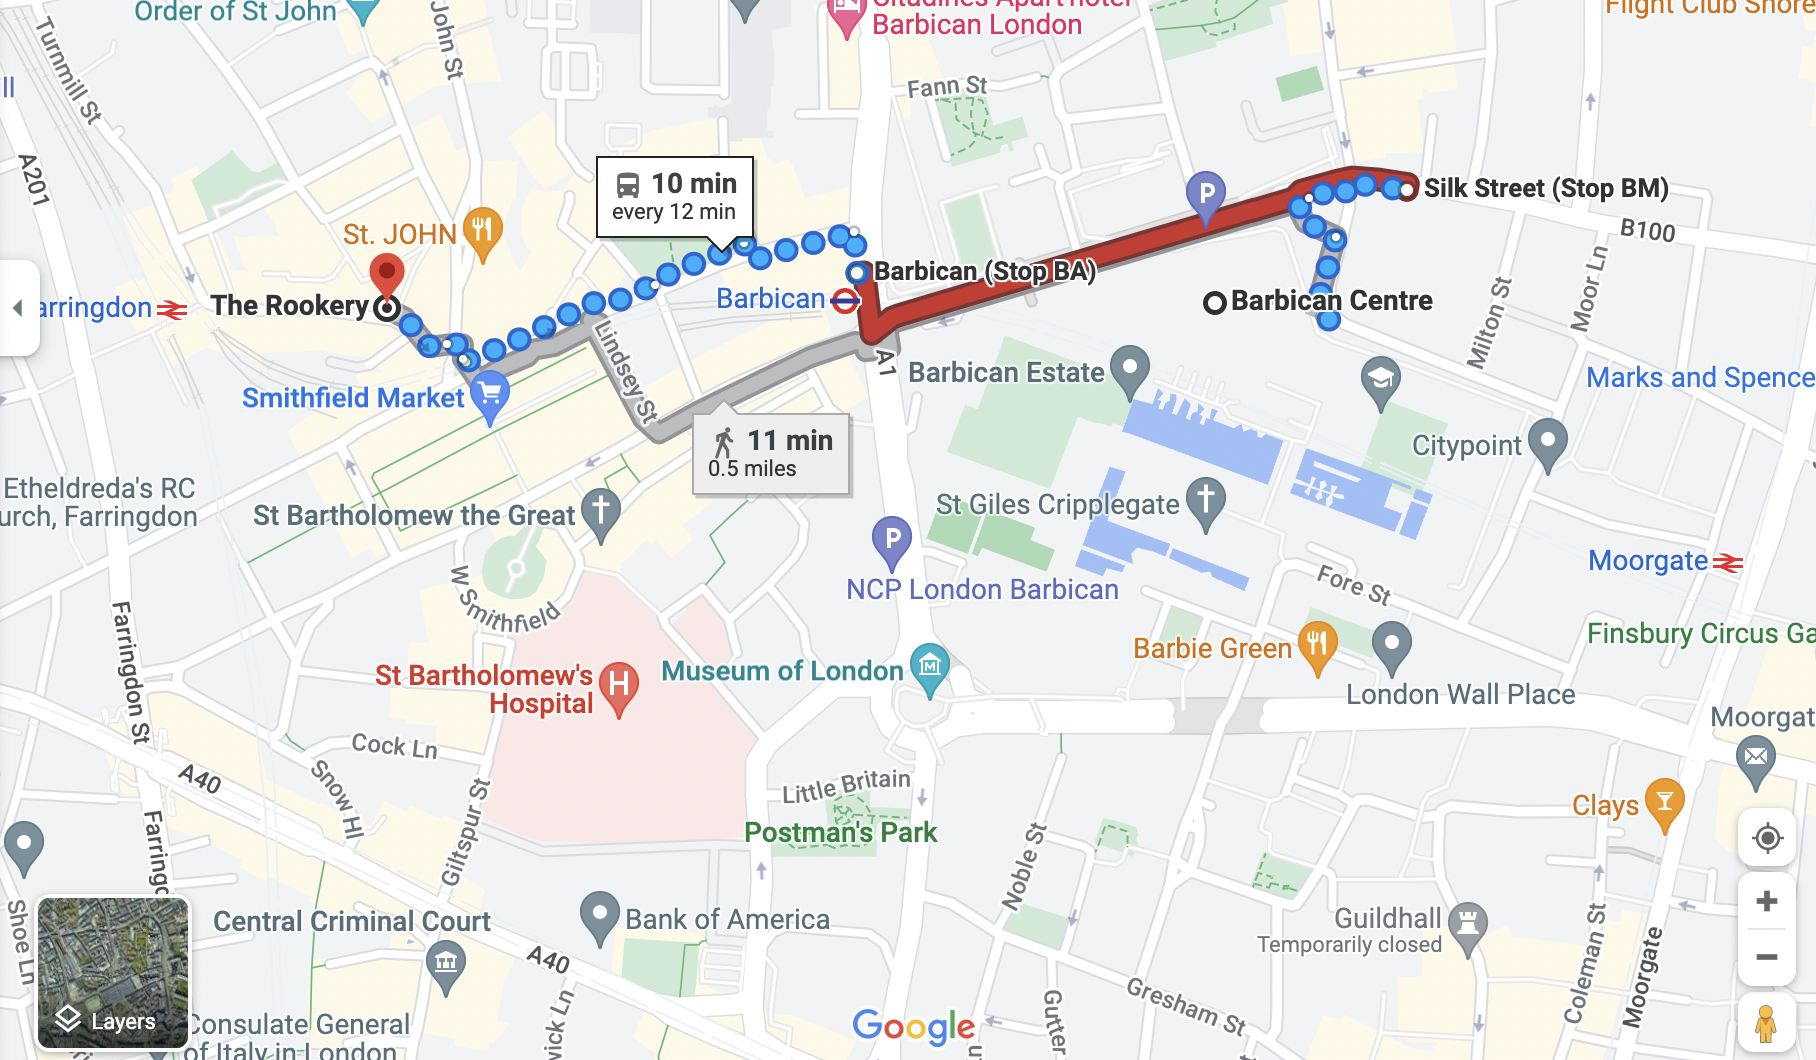 Google maps directions from Barbican Centre to The Rookery